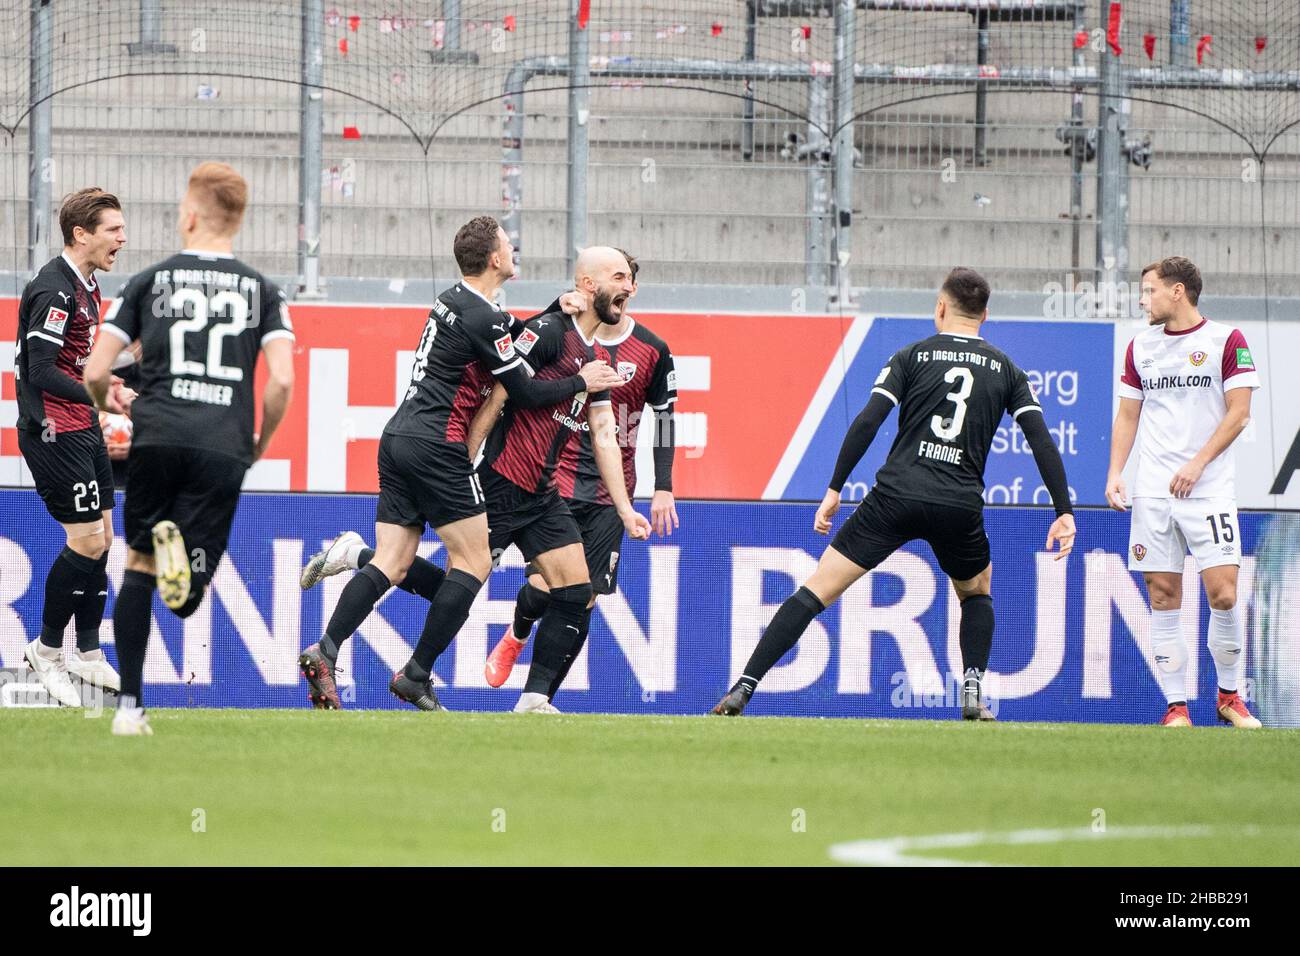 Ingolstadt, Germany. 18th Dec, 2021. Football: 2. Bundesliga, FC Ingolstadt 04 - Dynamo Dresden, Matchday 18, Audi Sportpark. Ingolstadt's Nico Antonitsch (centre) celebrates with his team-mates after scoring the 1:0 goal. Credit: Matthias Balk/dpa - IMPORTANT NOTE: In accordance with the regulations of the DFL Deutsche Fußball Liga and/or the DFB Deutscher Fußball-Bund, it is prohibited to use or have used photographs taken in the stadium and/or of the match in the form of sequence pictures and/or video-like photo series./dpa/Alamy Live News Stock Photo